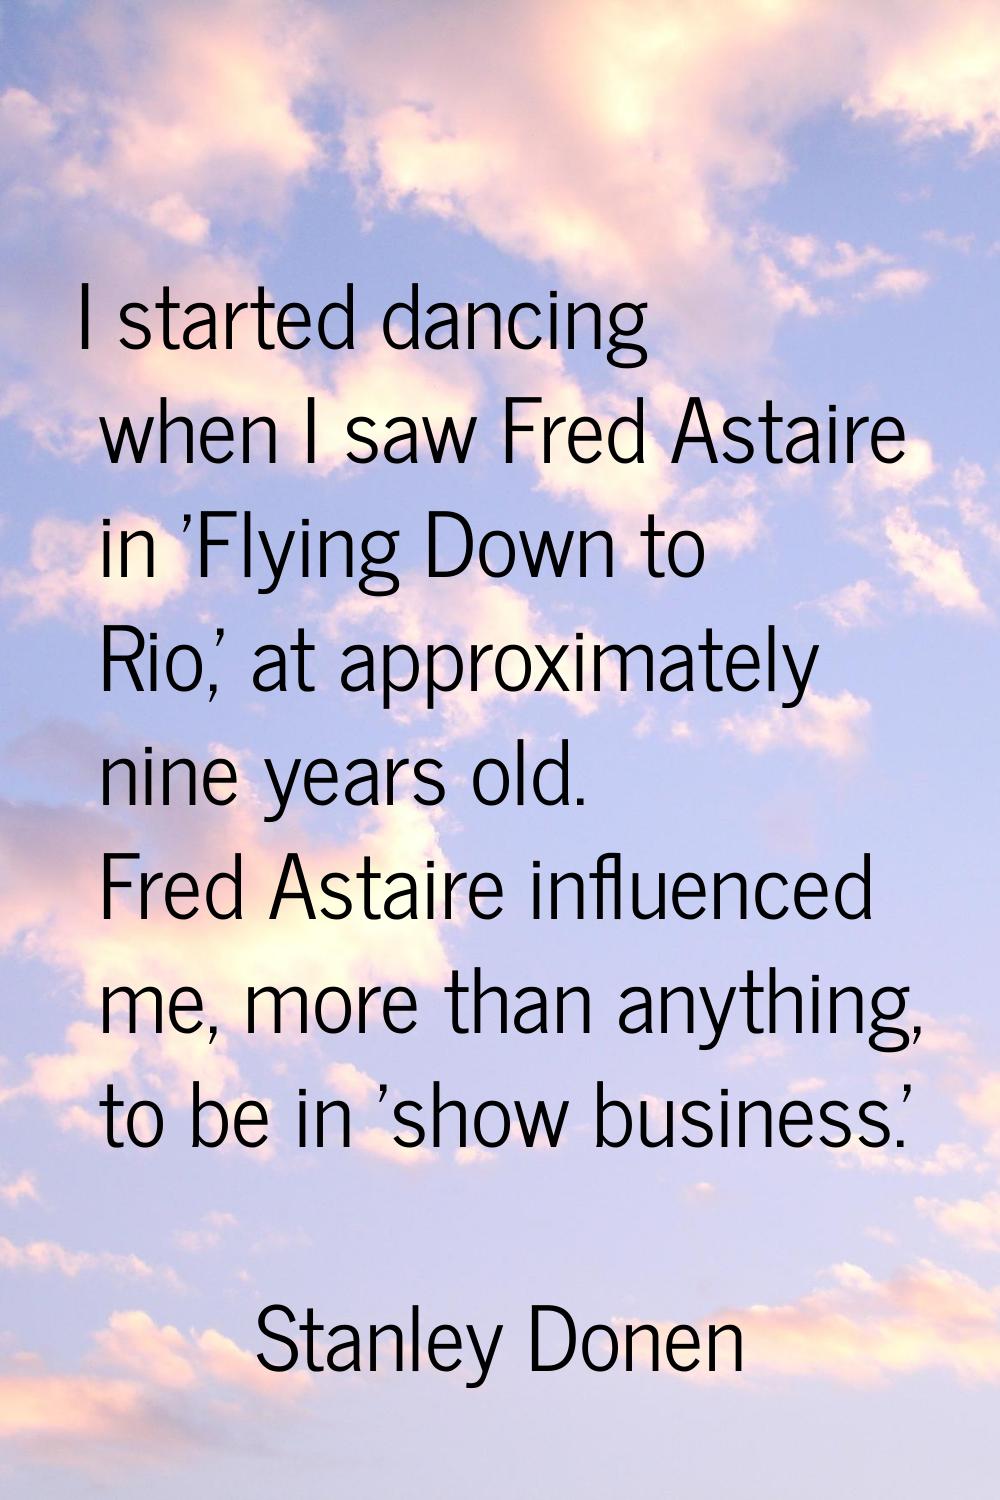 I started dancing when I saw Fred Astaire in 'Flying Down to Rio,' at approximately nine years old.